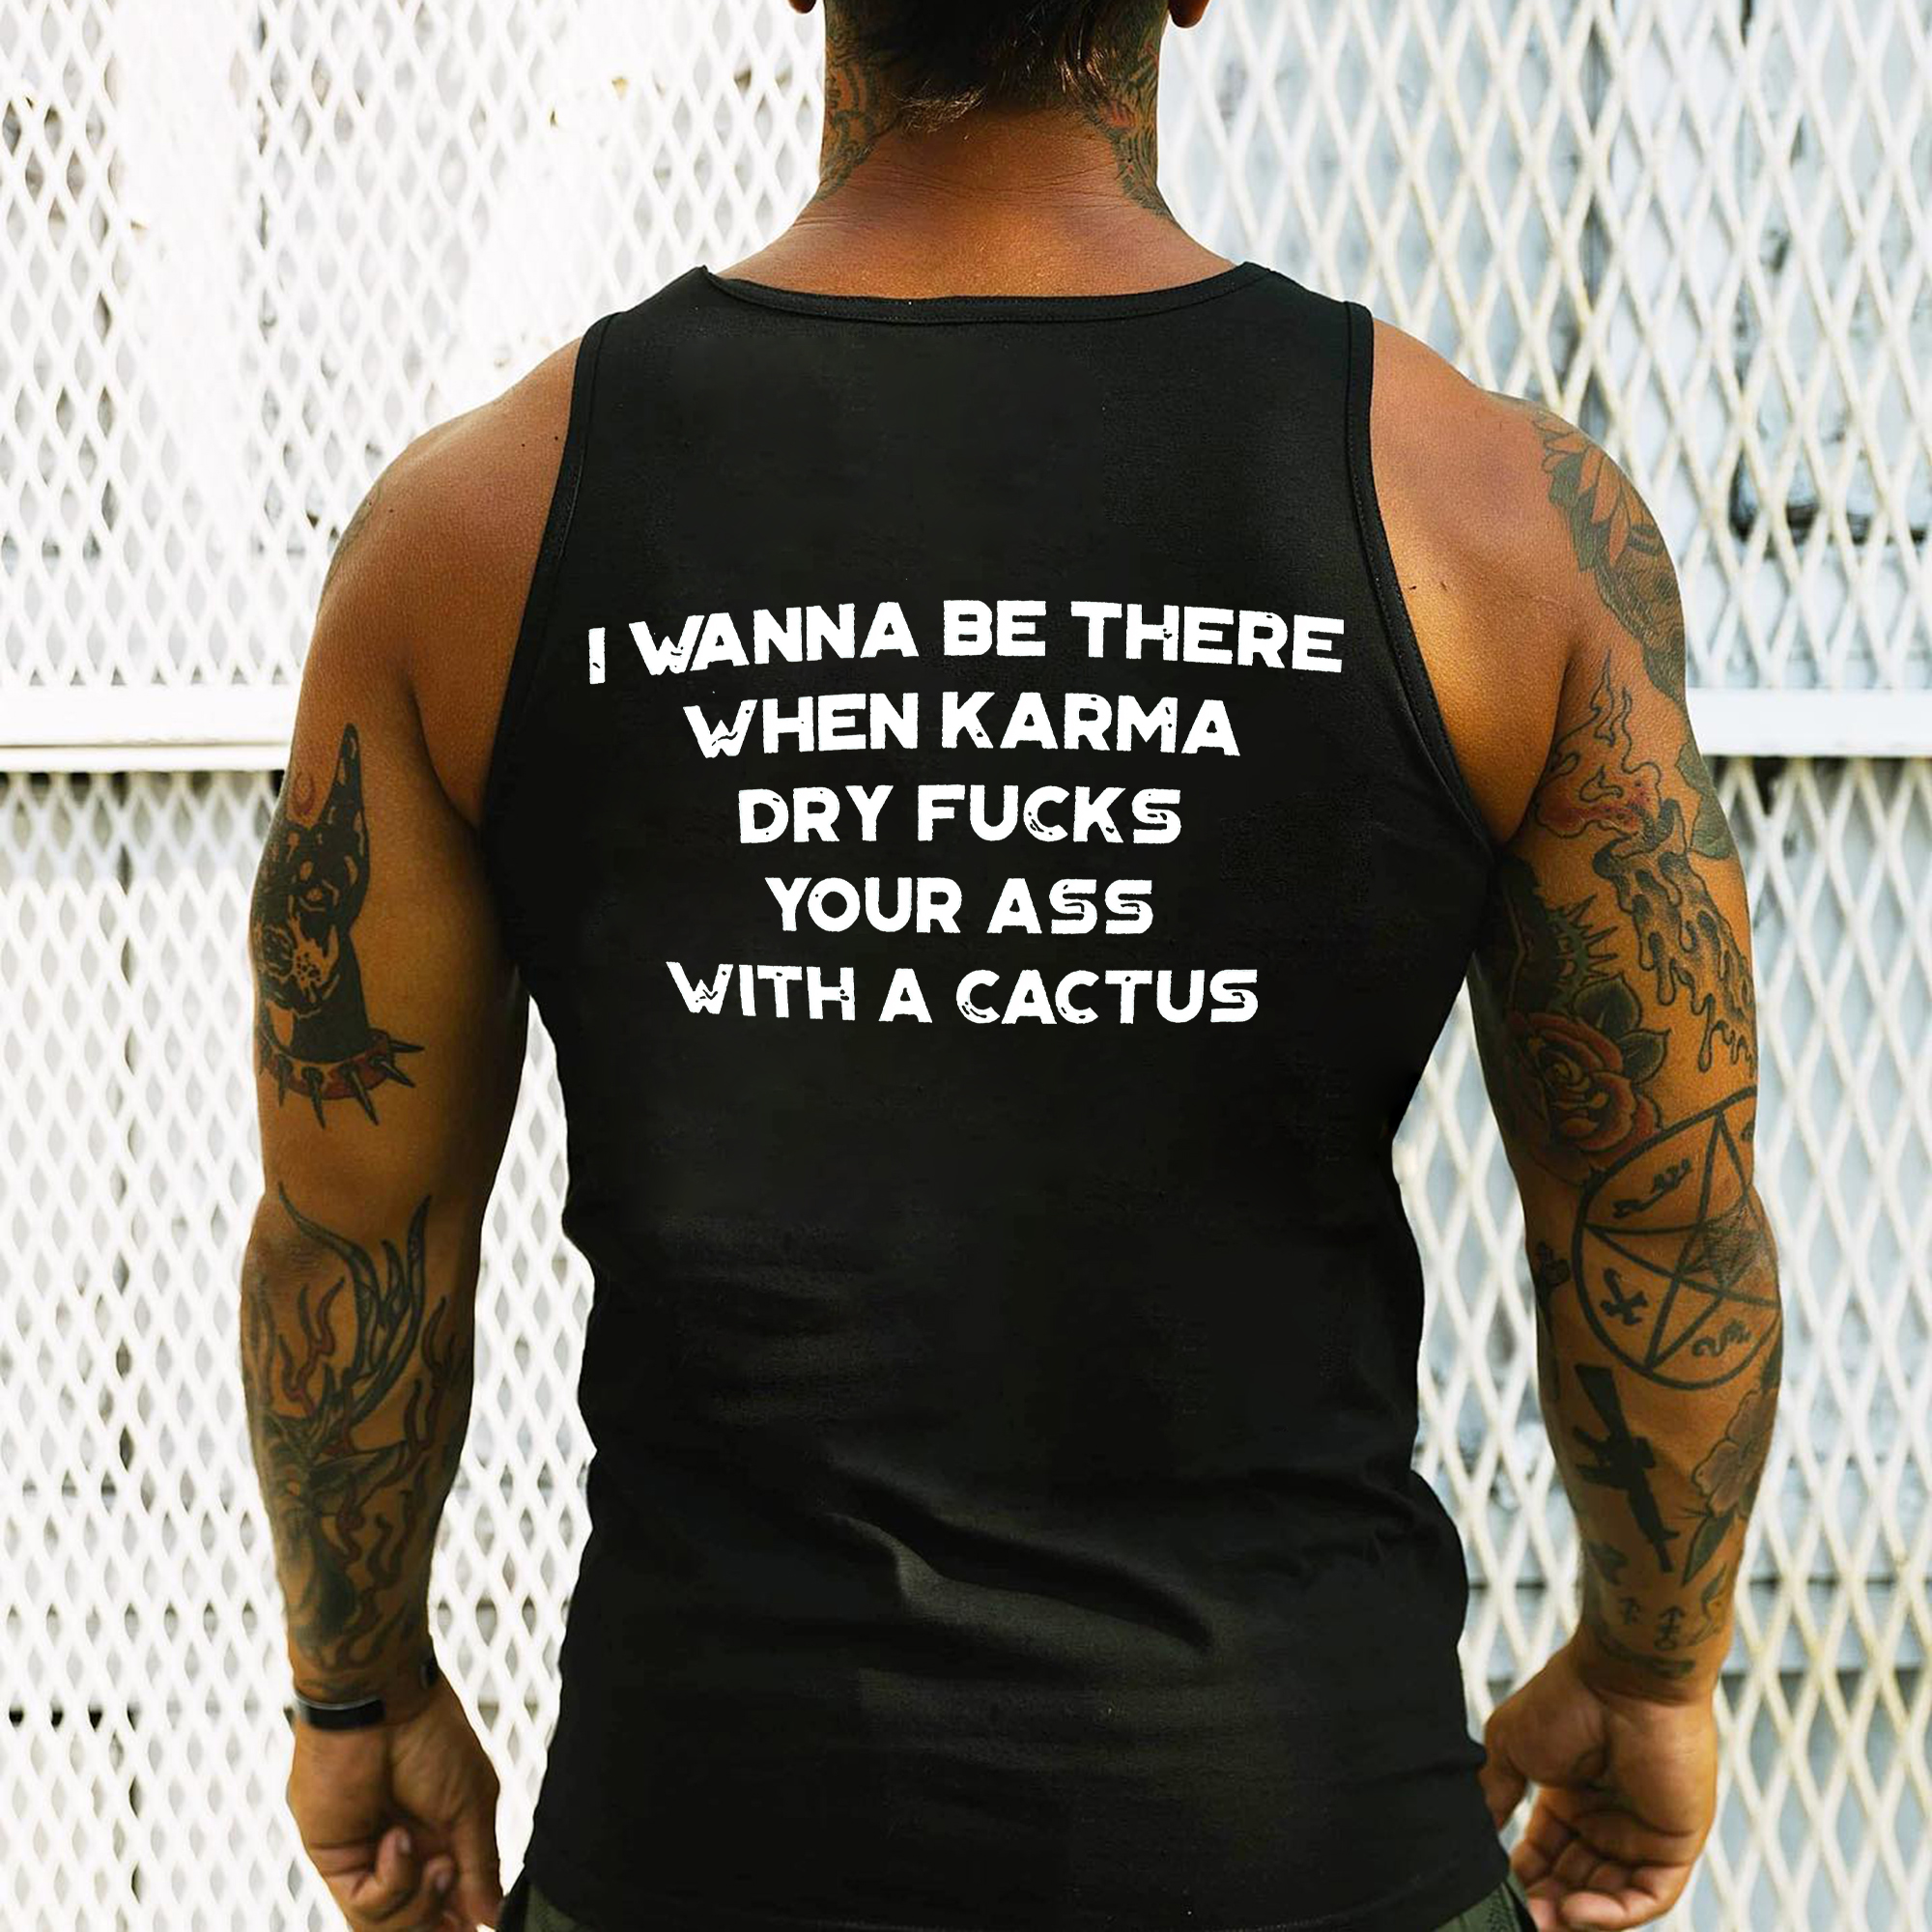 I Wanna Be There When Karma Dry Fucks Your Ass With A Cactus Print Men's Vest